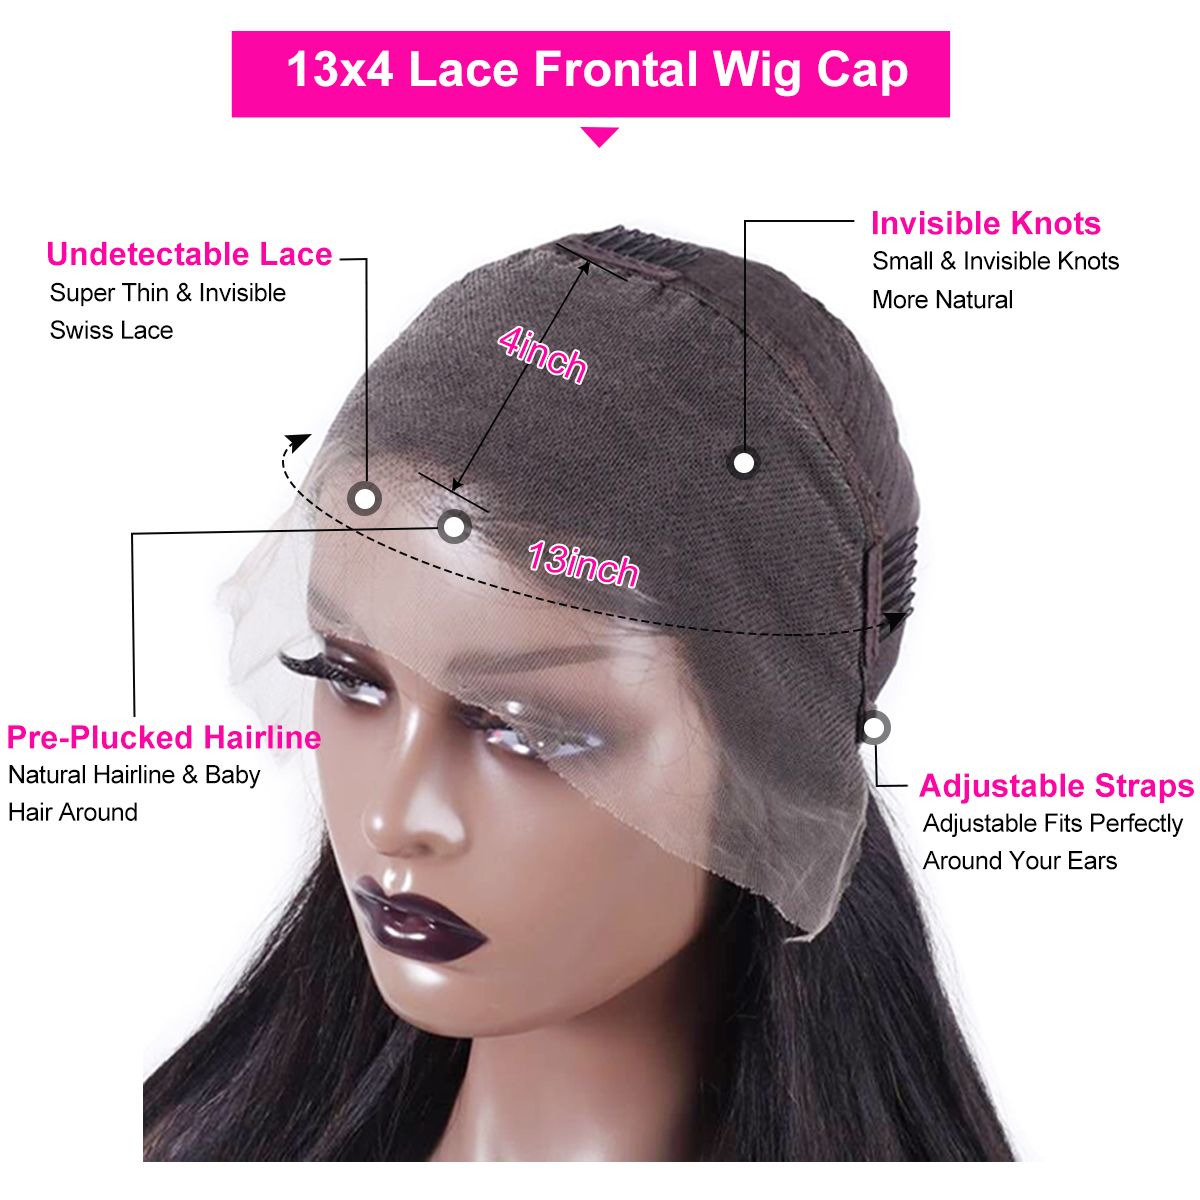 13x4 lace frontal wig cap